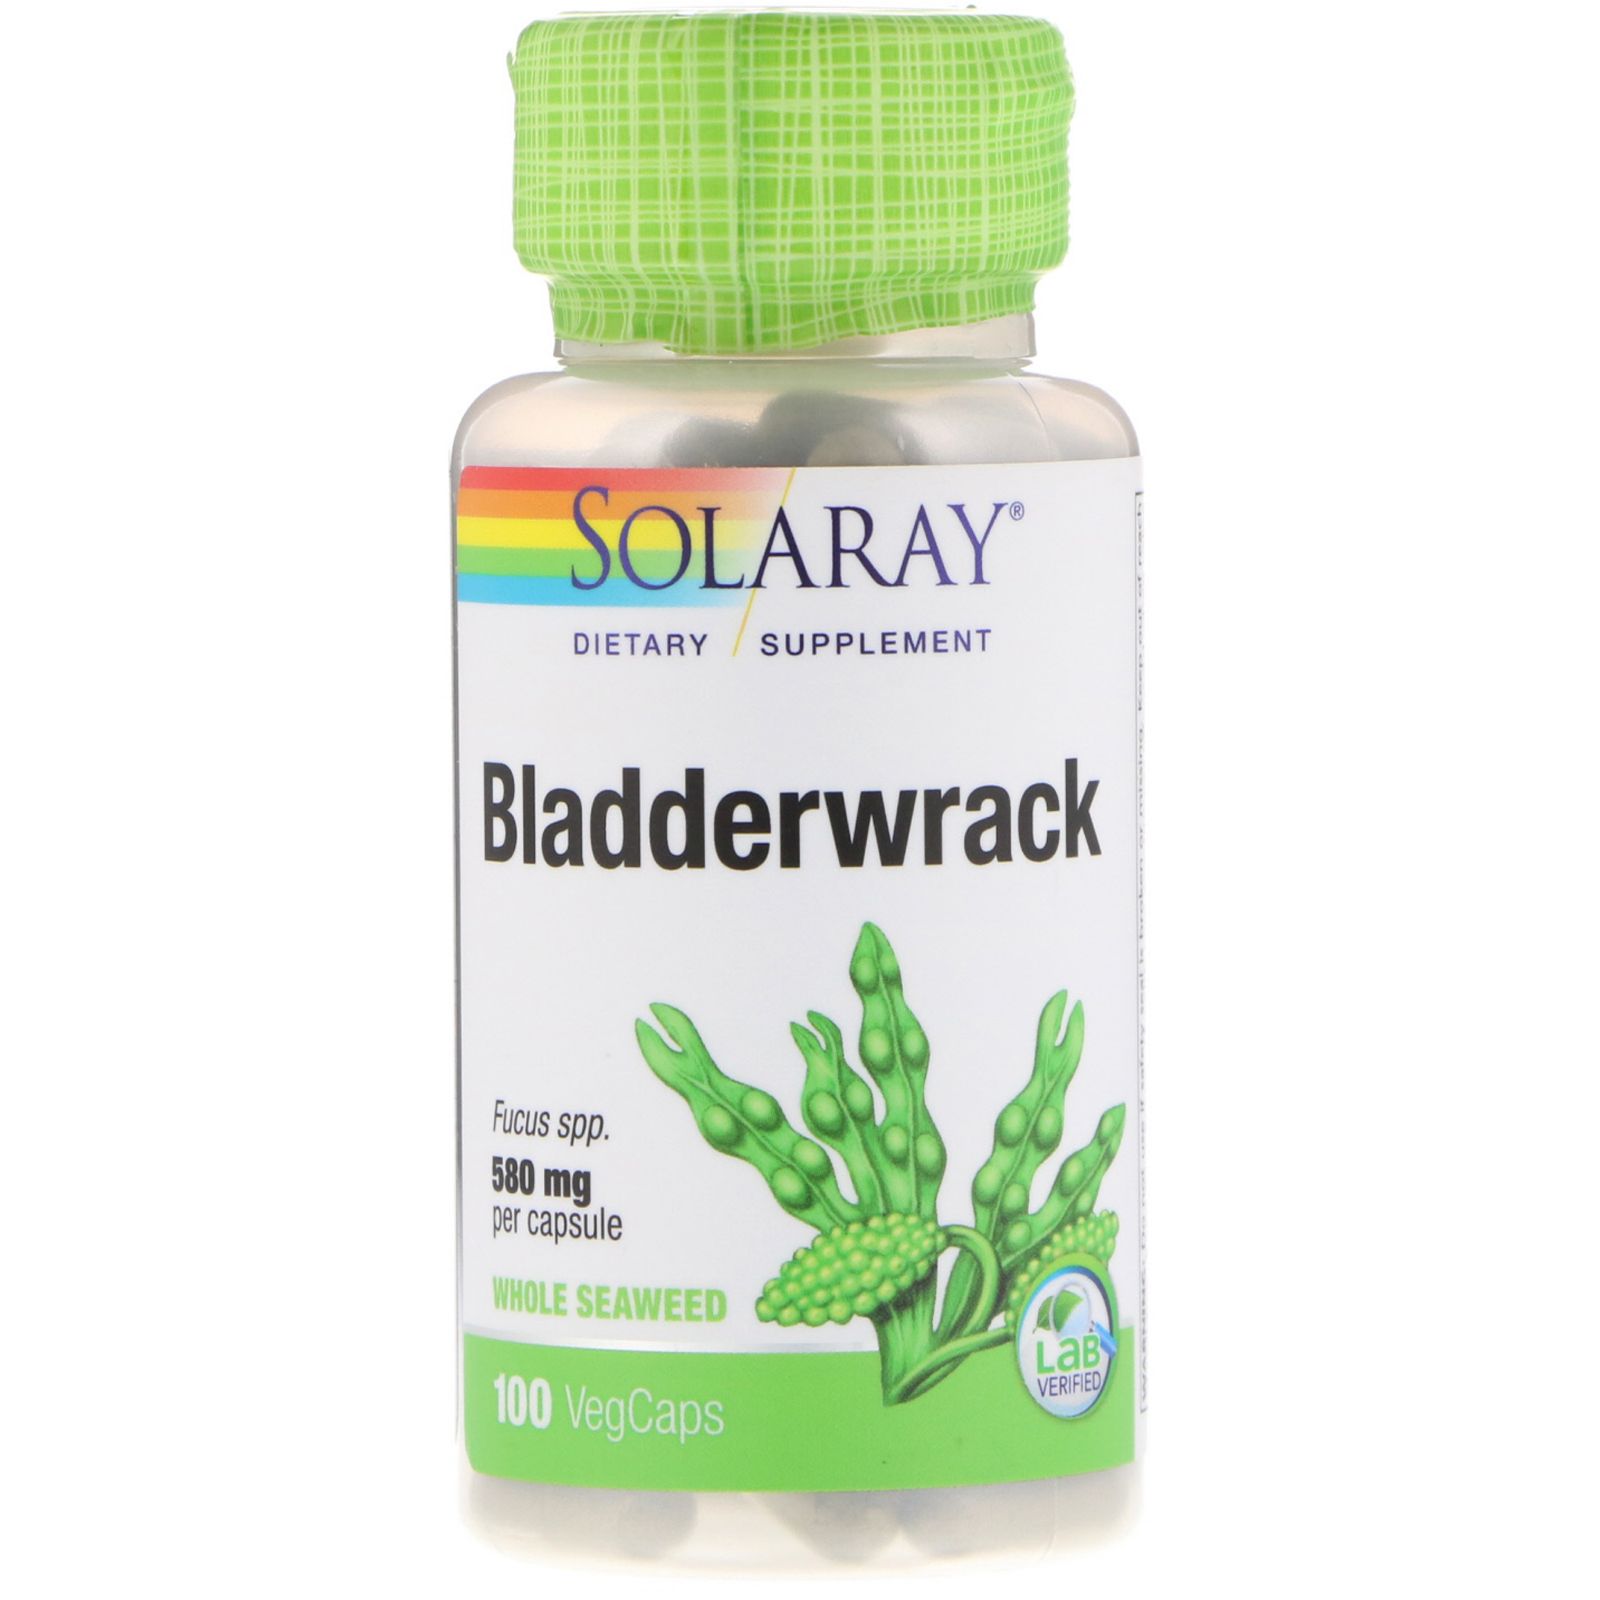 The Comprehensive Guide to the Benefits of Bladderwrack Supplements